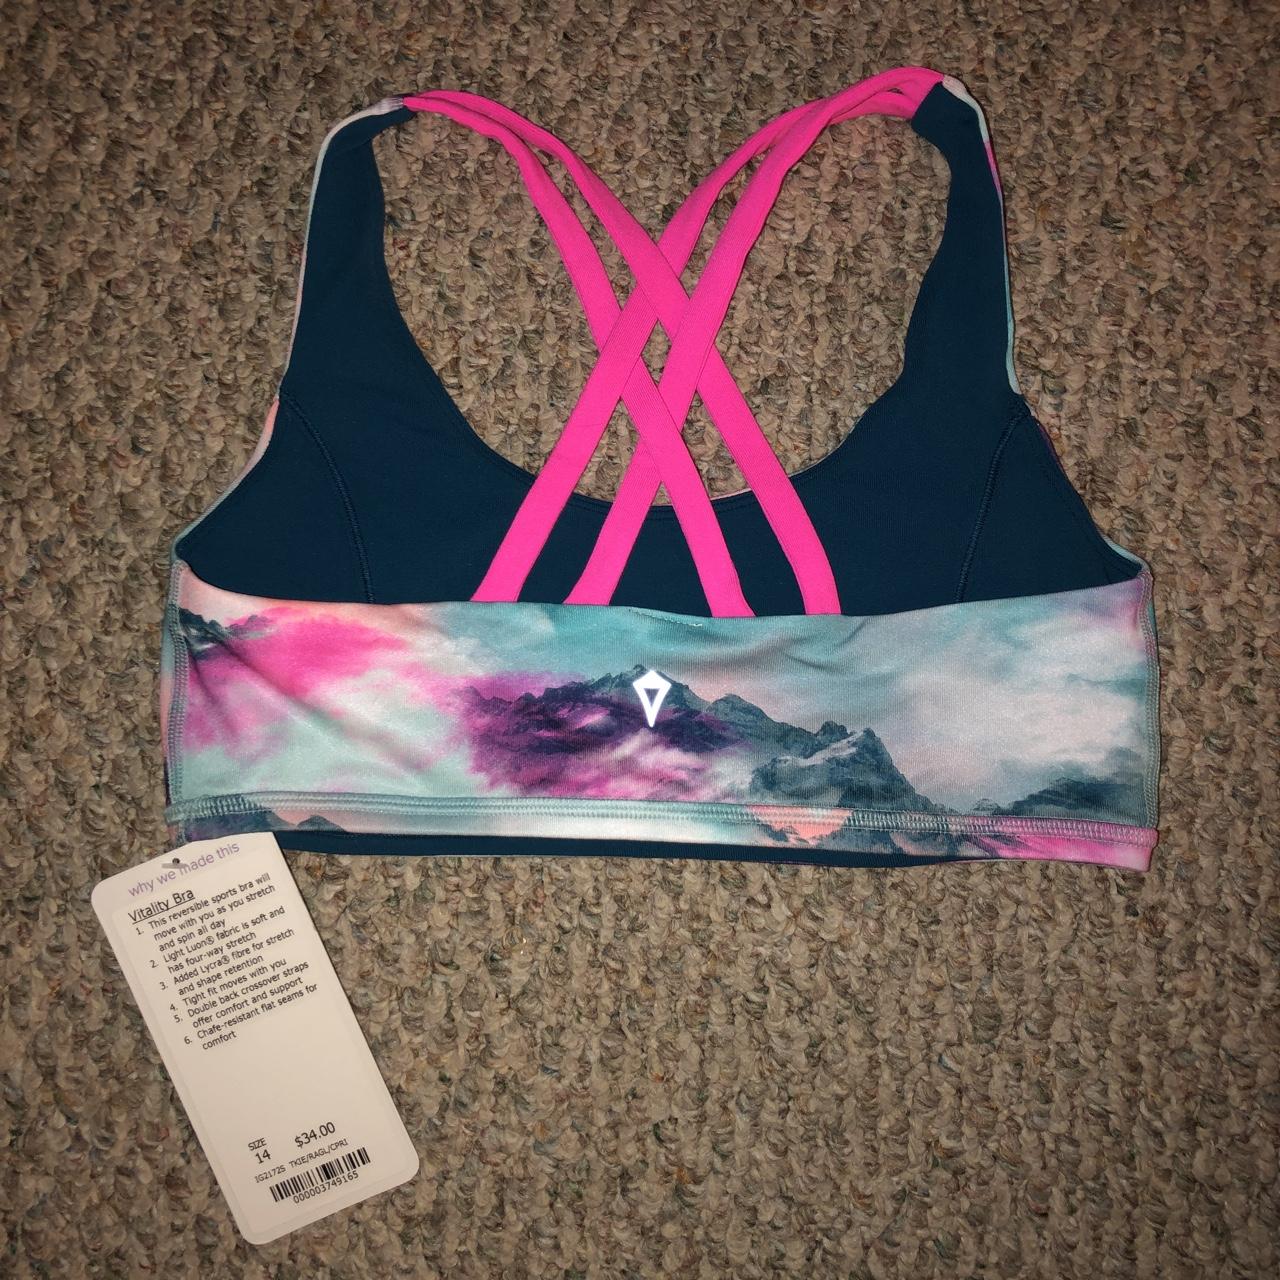 Lululemon youth size 14 sports bra but fits an adult